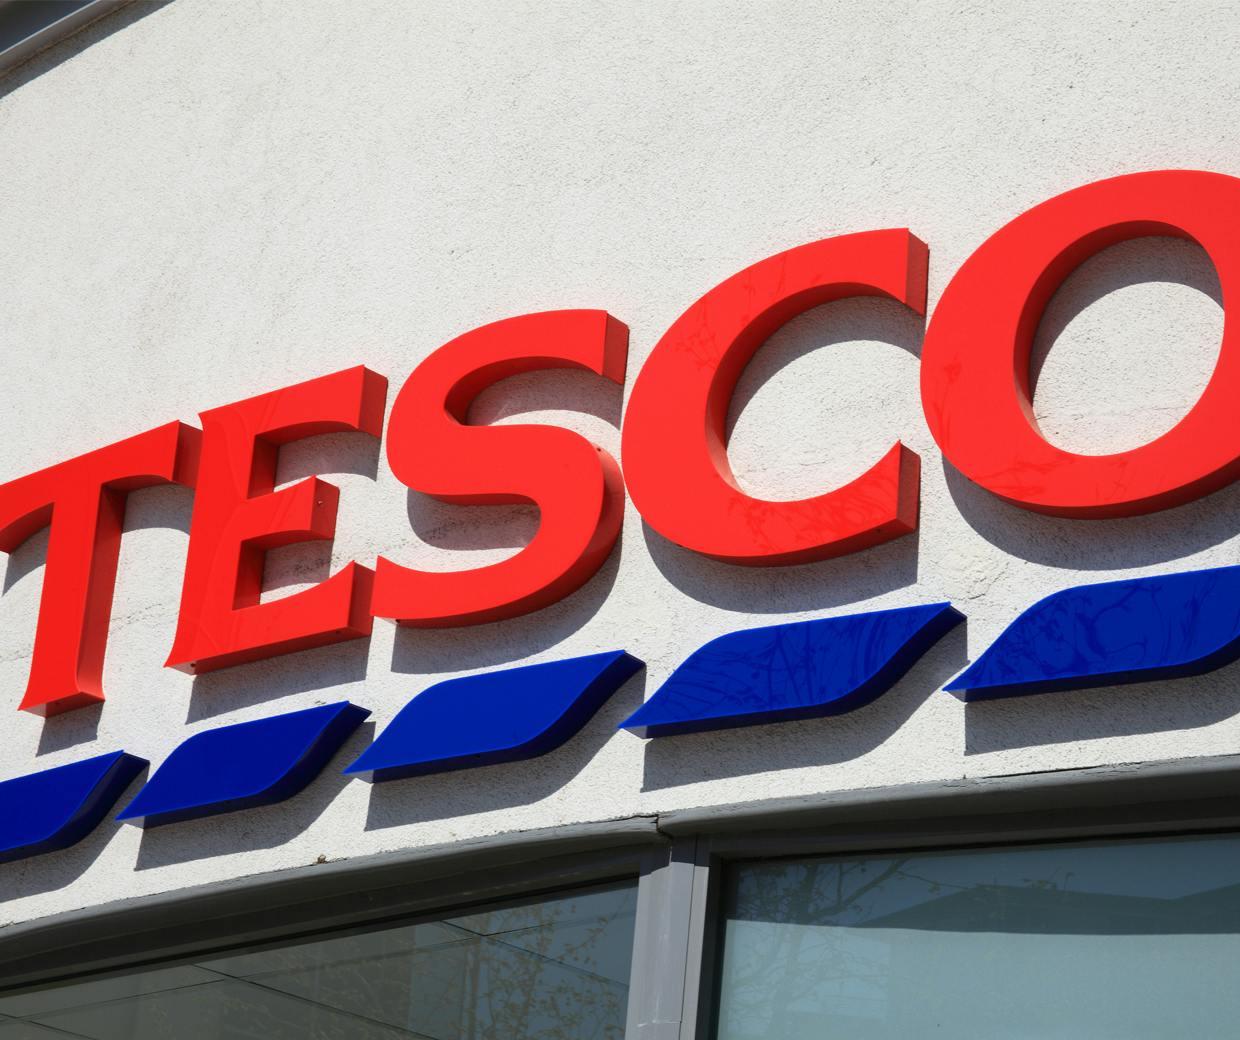 Tesco: Latest News, Analysis and Commentary